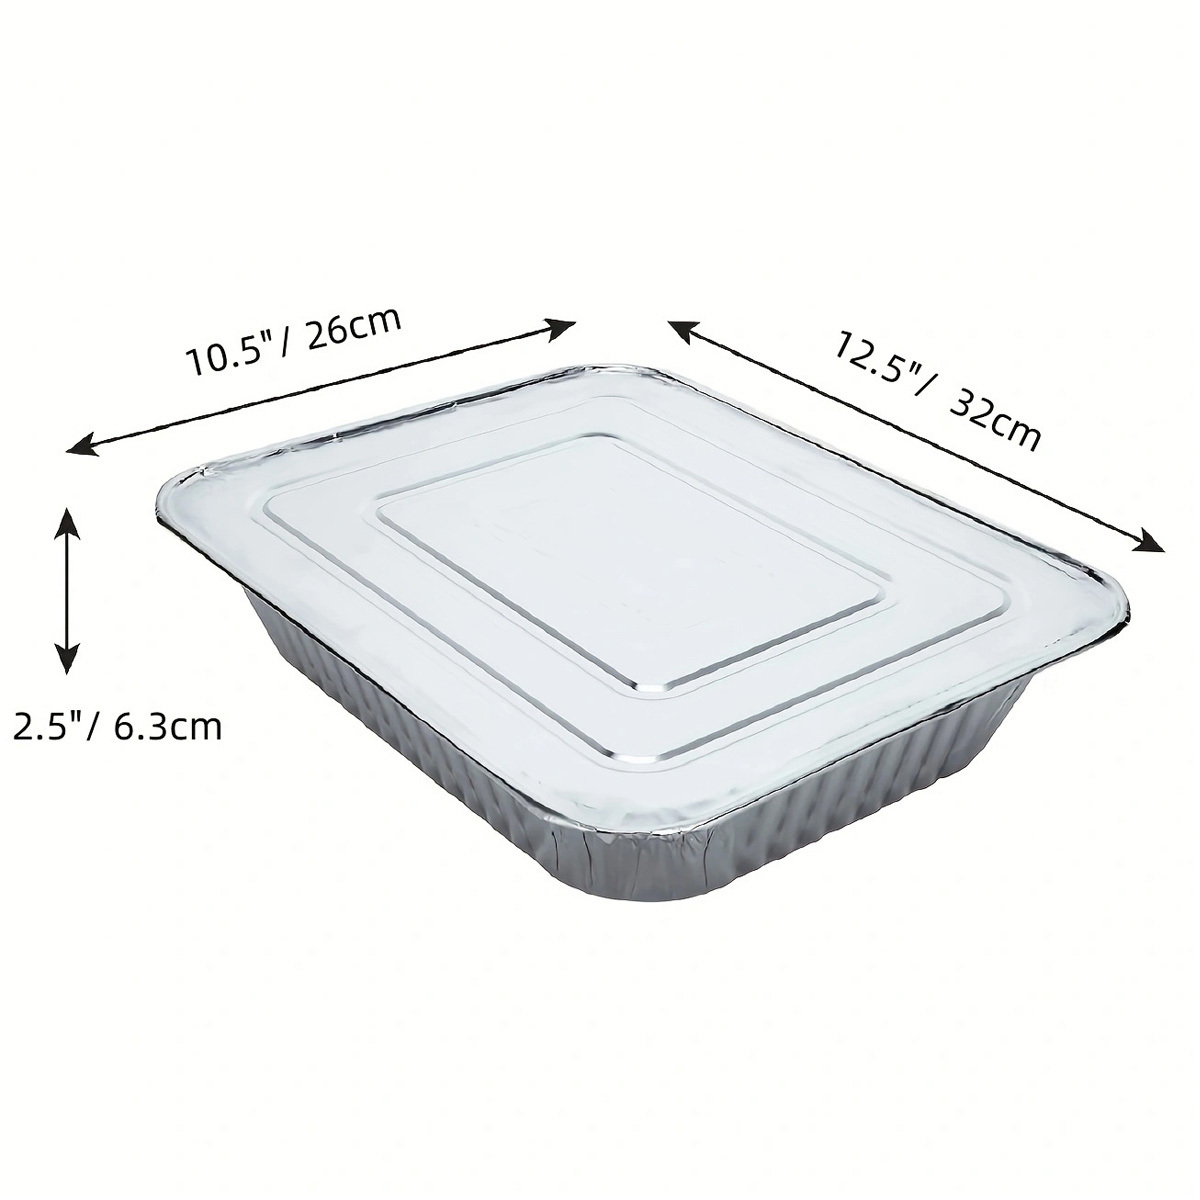 8pcs, Heavy Duty Aluminum Pans with Foil Lids - Extra Thick Disposable Foil  Food Containers for Baking, Cooking, Roasting, and Heating - 9x13 Inches